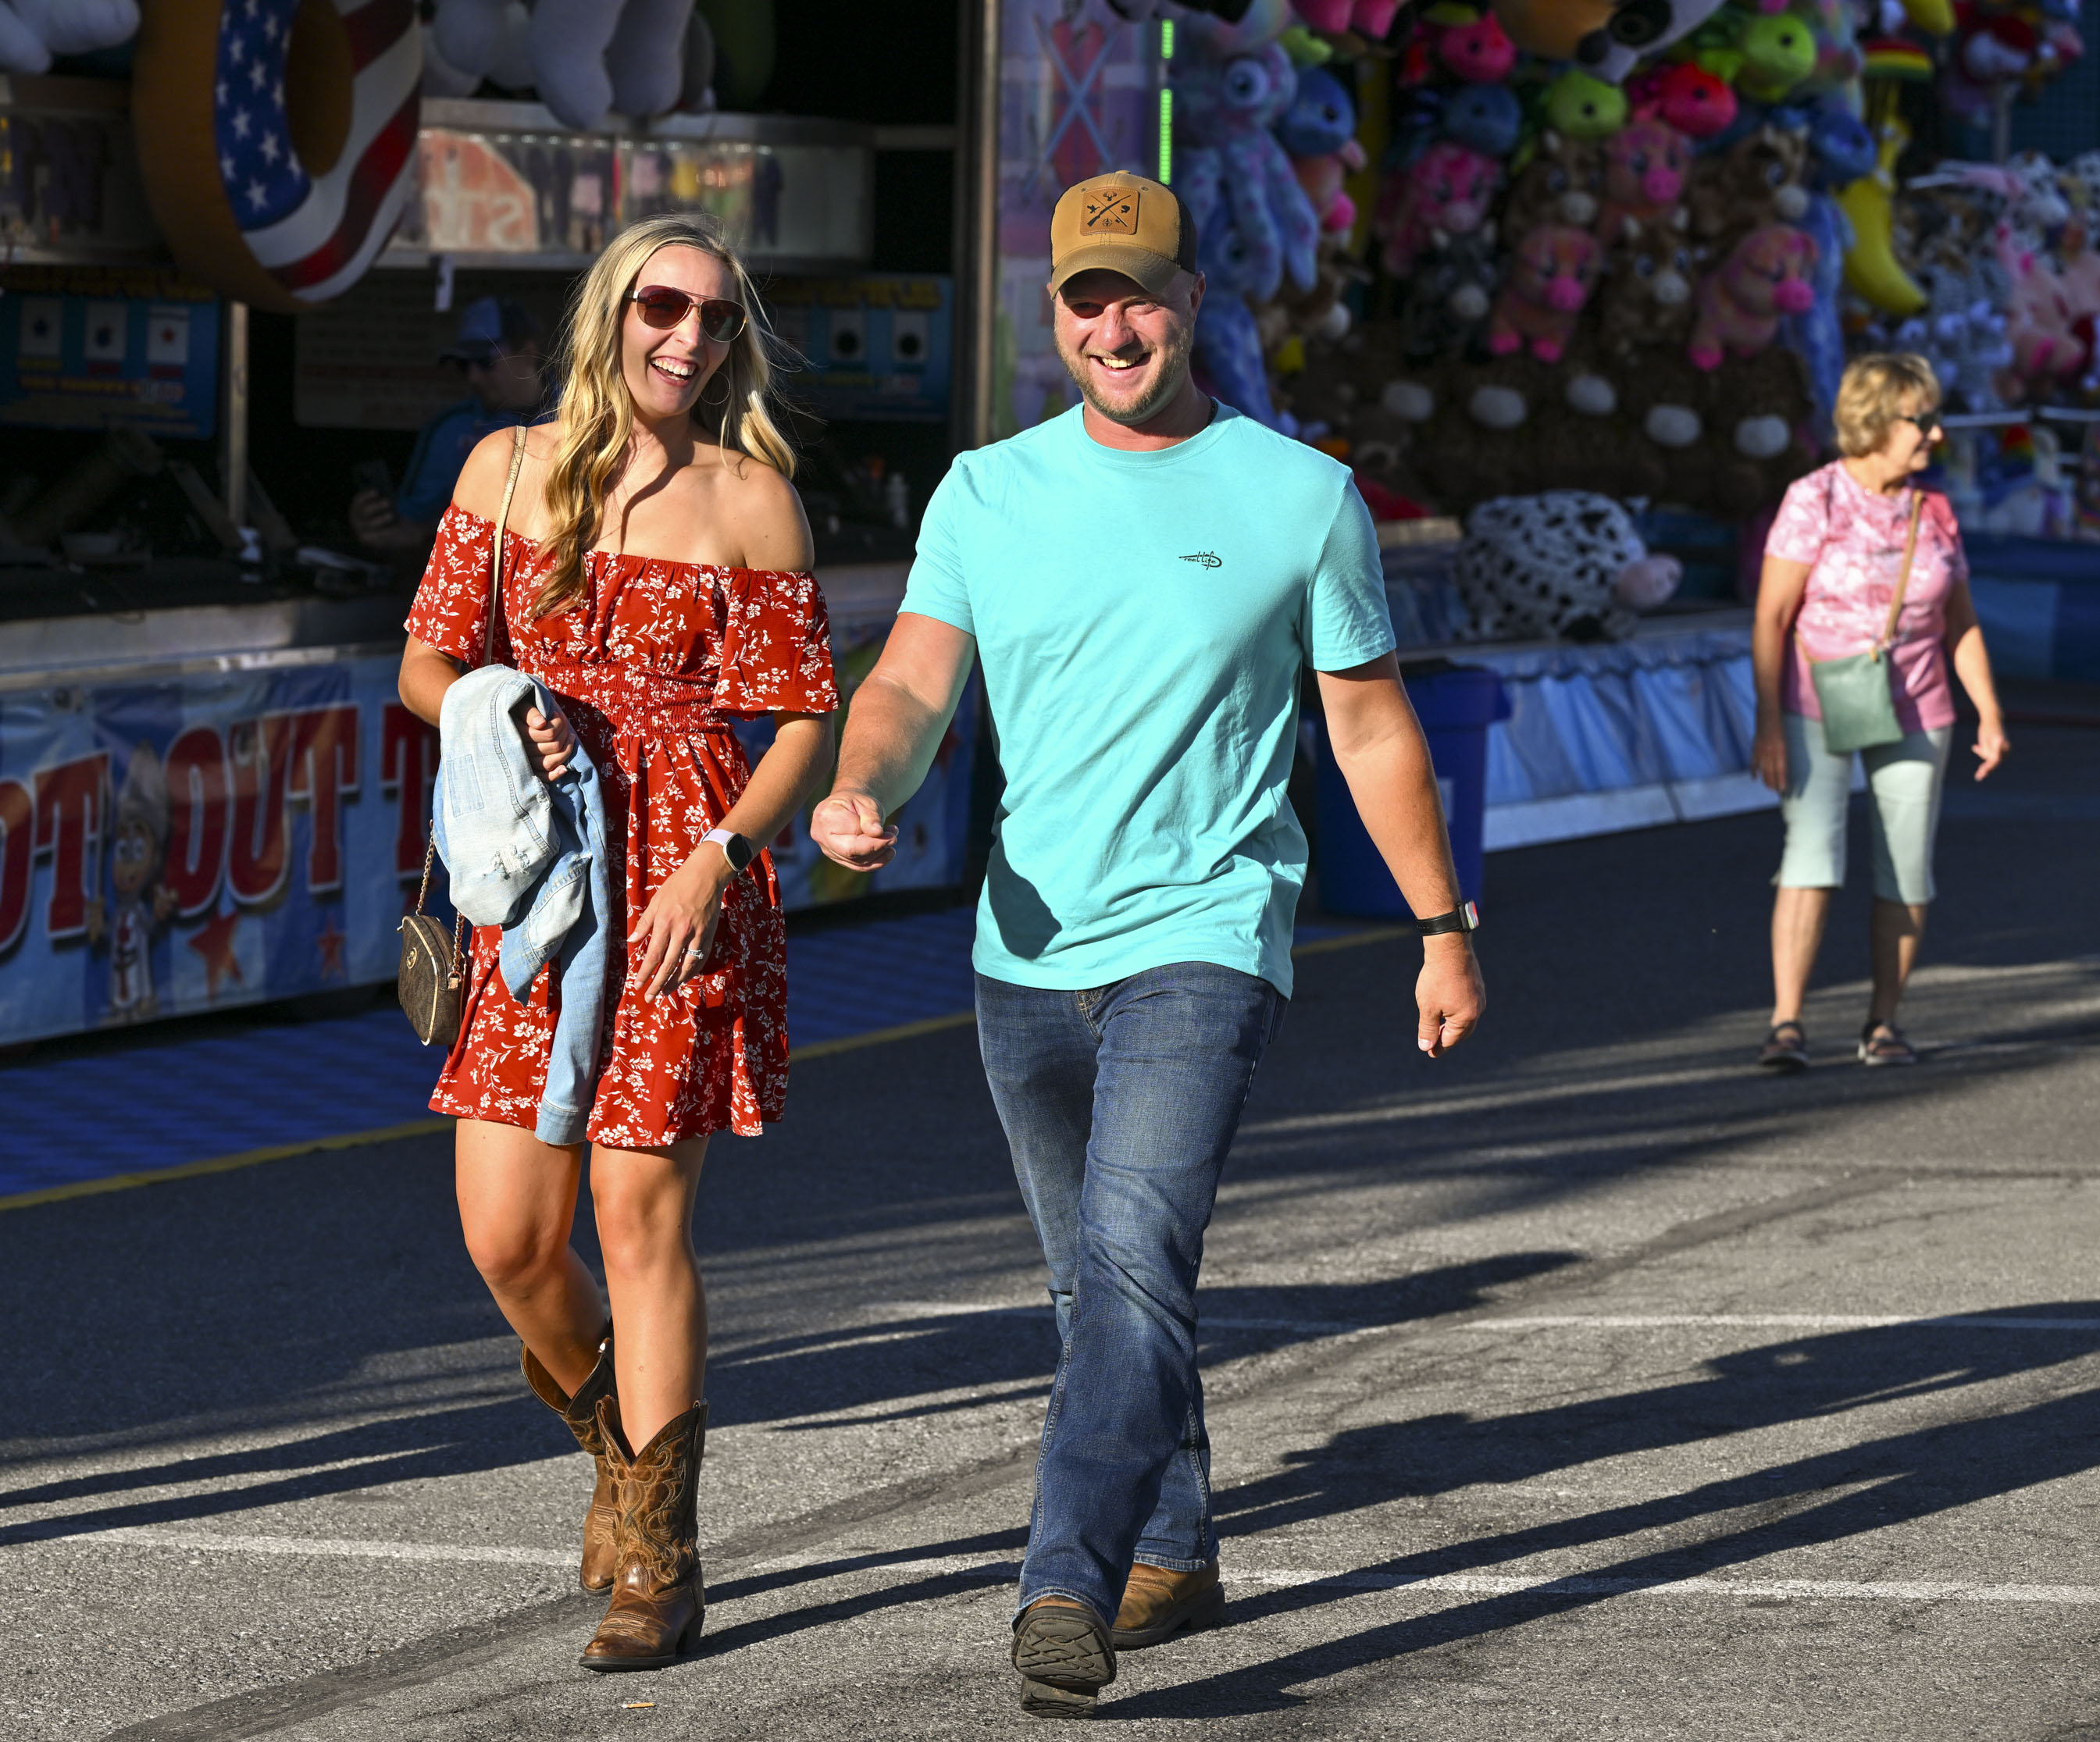 People enjoy the sights, sounds and food Thursday, Aug. 31, 2023, at the Allentown Fair. (April Gamiz/The Morning Call)